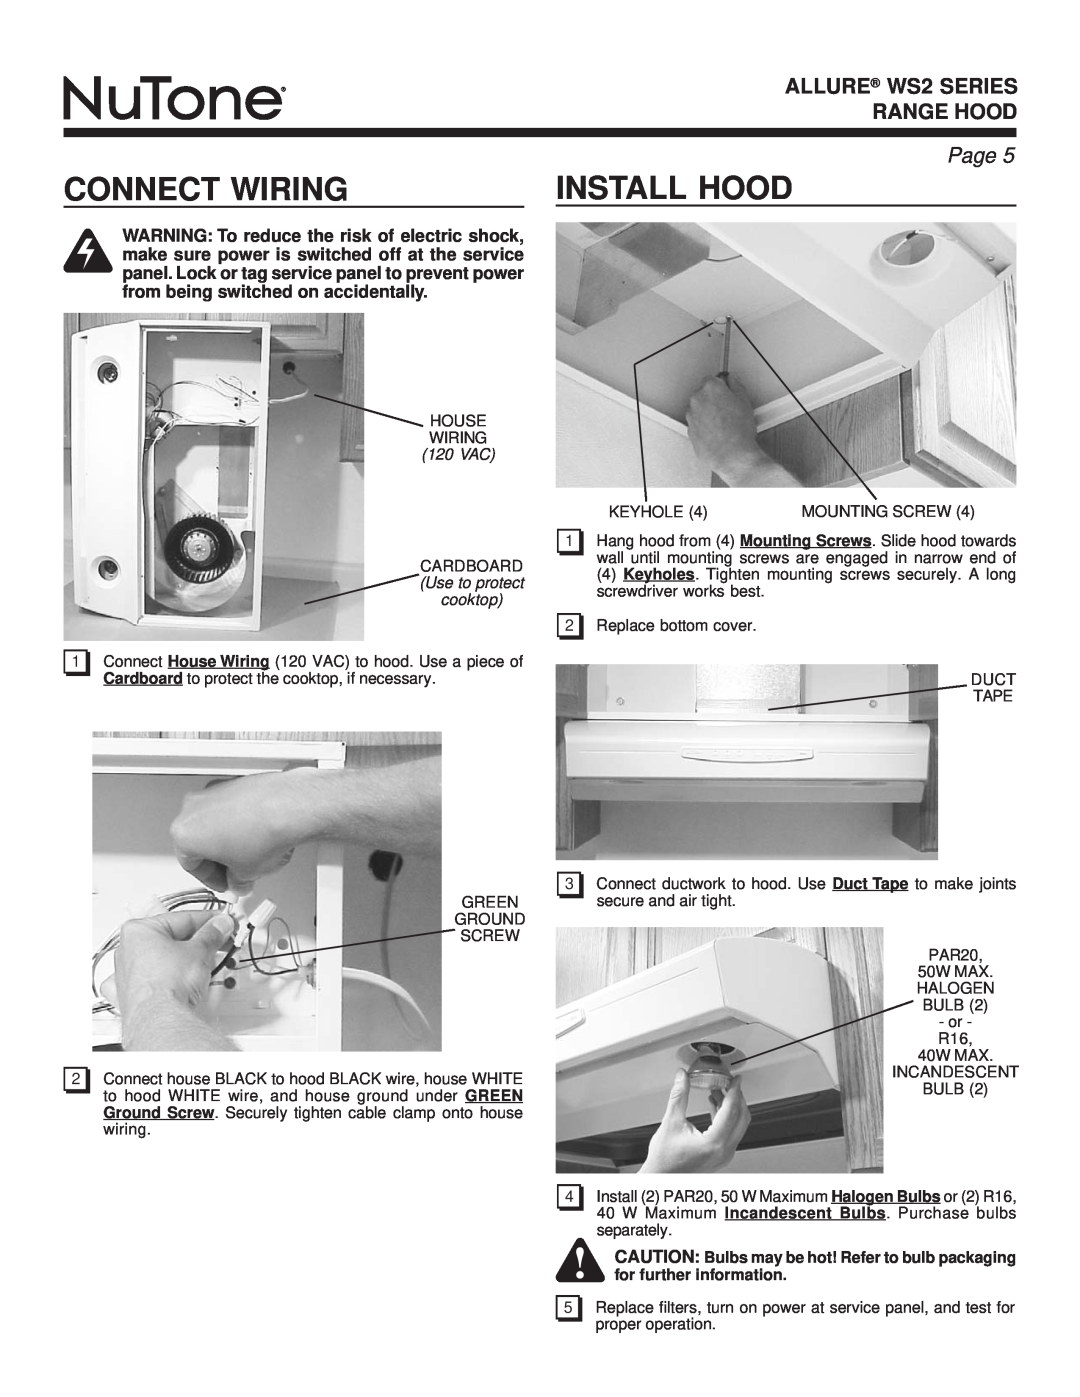 NuTone warranty Connect Wiring, Install Hood, ALLURE WS2 SERIES, Range Hood, Page, 120 VAC 